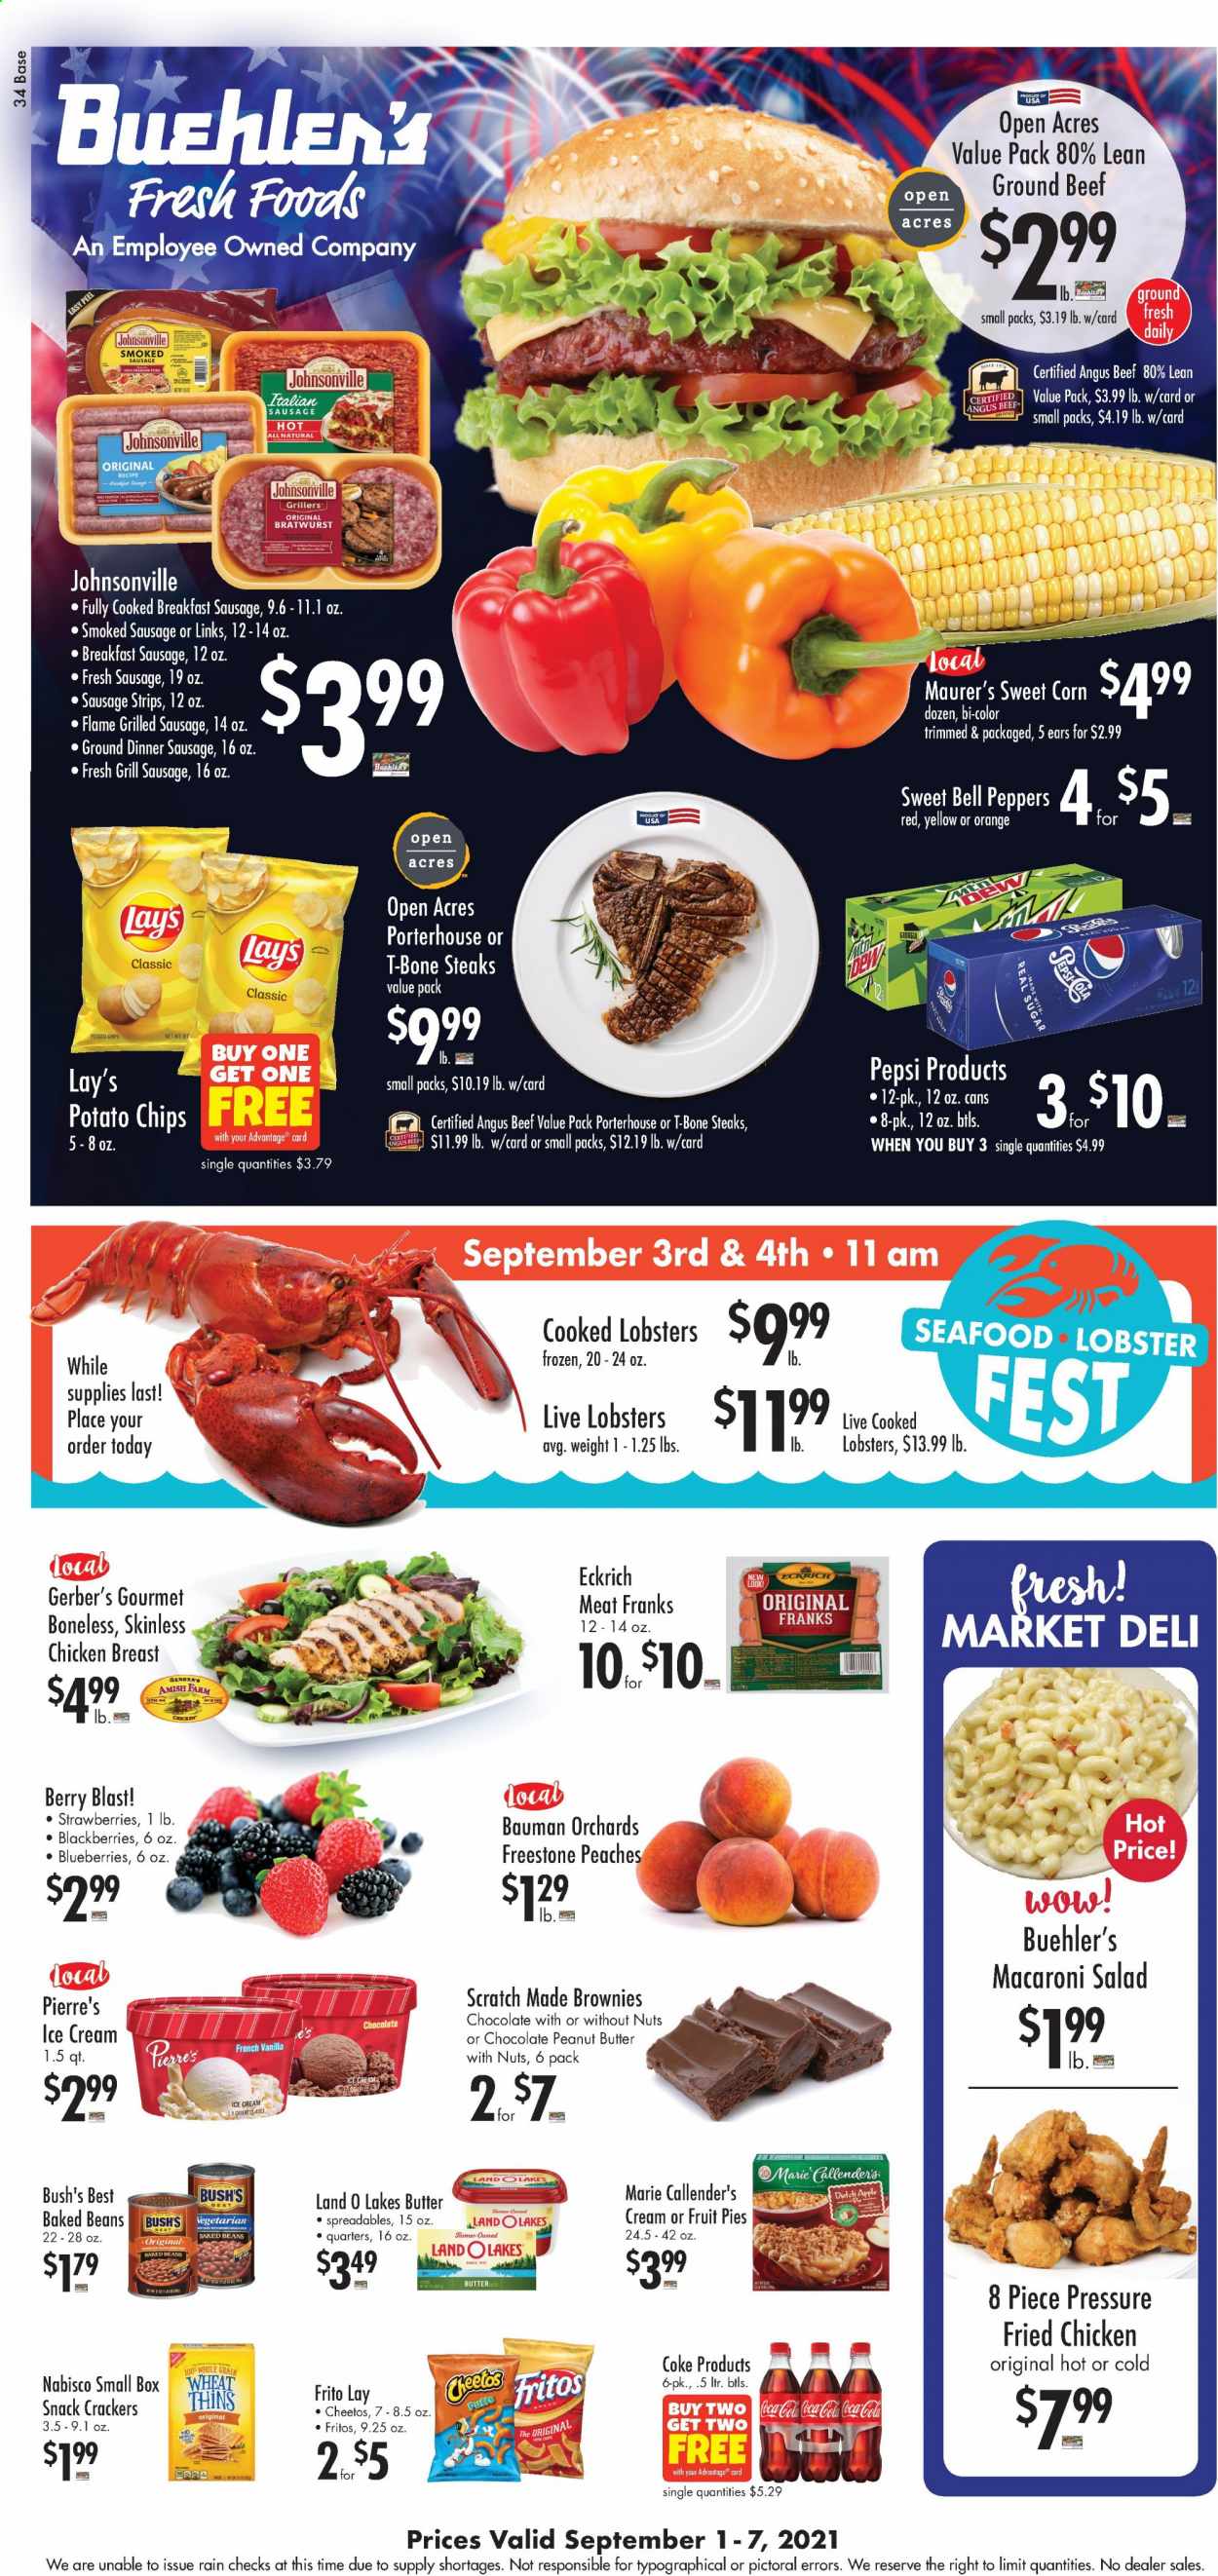 thumbnail - Buehler's Flyer - 09/01/2021 - 09/07/2021 - Sales products - puffs, brownies, beans, corn, blackberries, blueberries, strawberries, oranges, lobster, seafood, fried chicken, Marie Callender's, Johnsonville, bratwurst, sausage, smoked sausage, macaroni salad, ice cream, strips, snack, crackers, Fritos, Gerber, potato chips, Cheetos, Lay’s, Thins, sugar, baked beans, peanut butter, Coca-Cola, Pepsi, chicken breasts, beef meat, ground beef, t-bone steak, steak, peaches. Page 1.